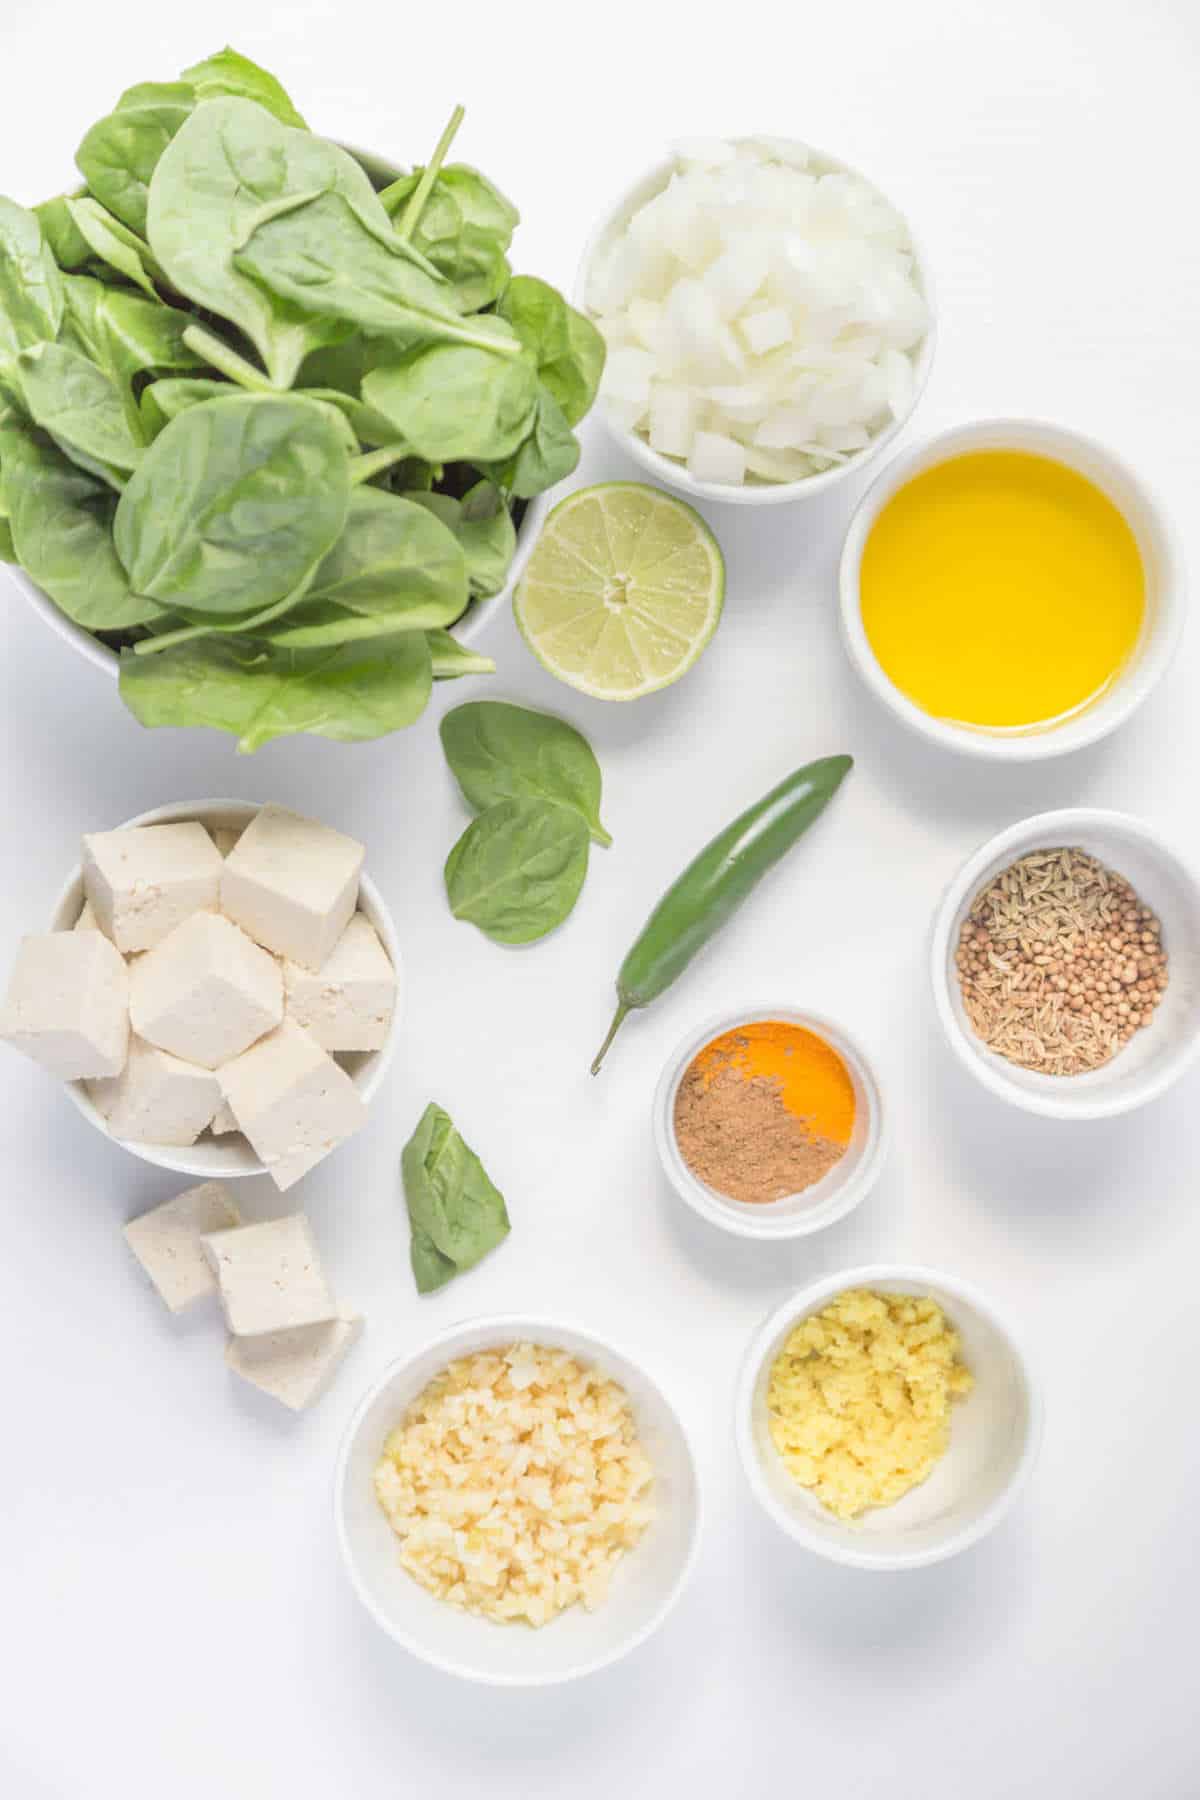 Ingredients for palak tofu measured in individually bowls on a light background.